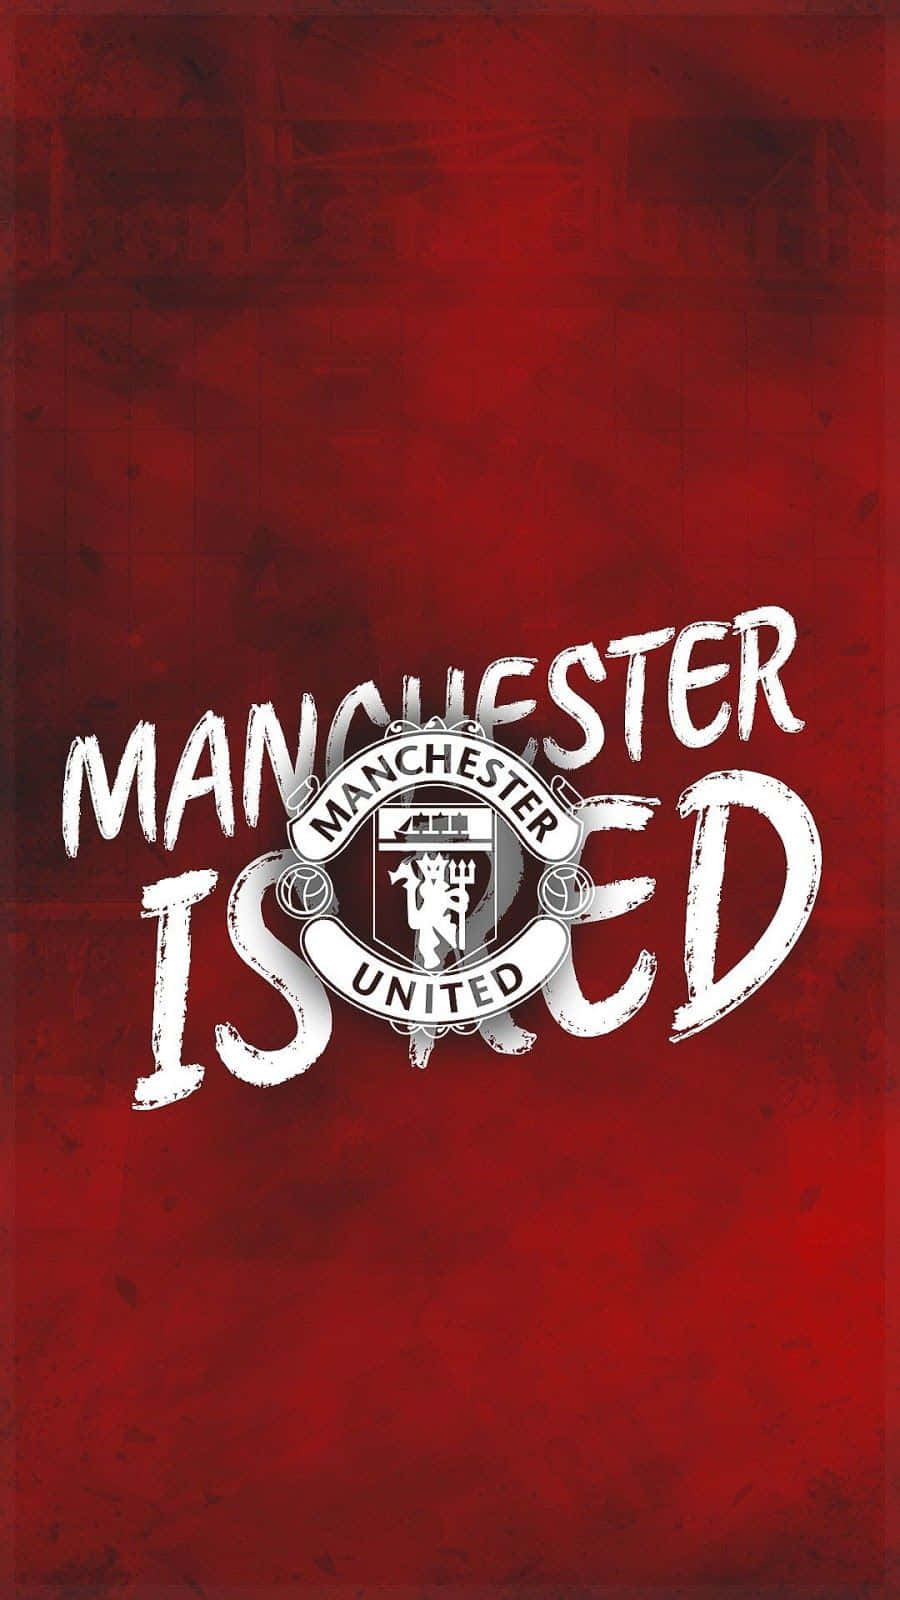 Free Manchester United Wallpaper Downloads, [500+] Manchester United  Wallpapers for FREE 